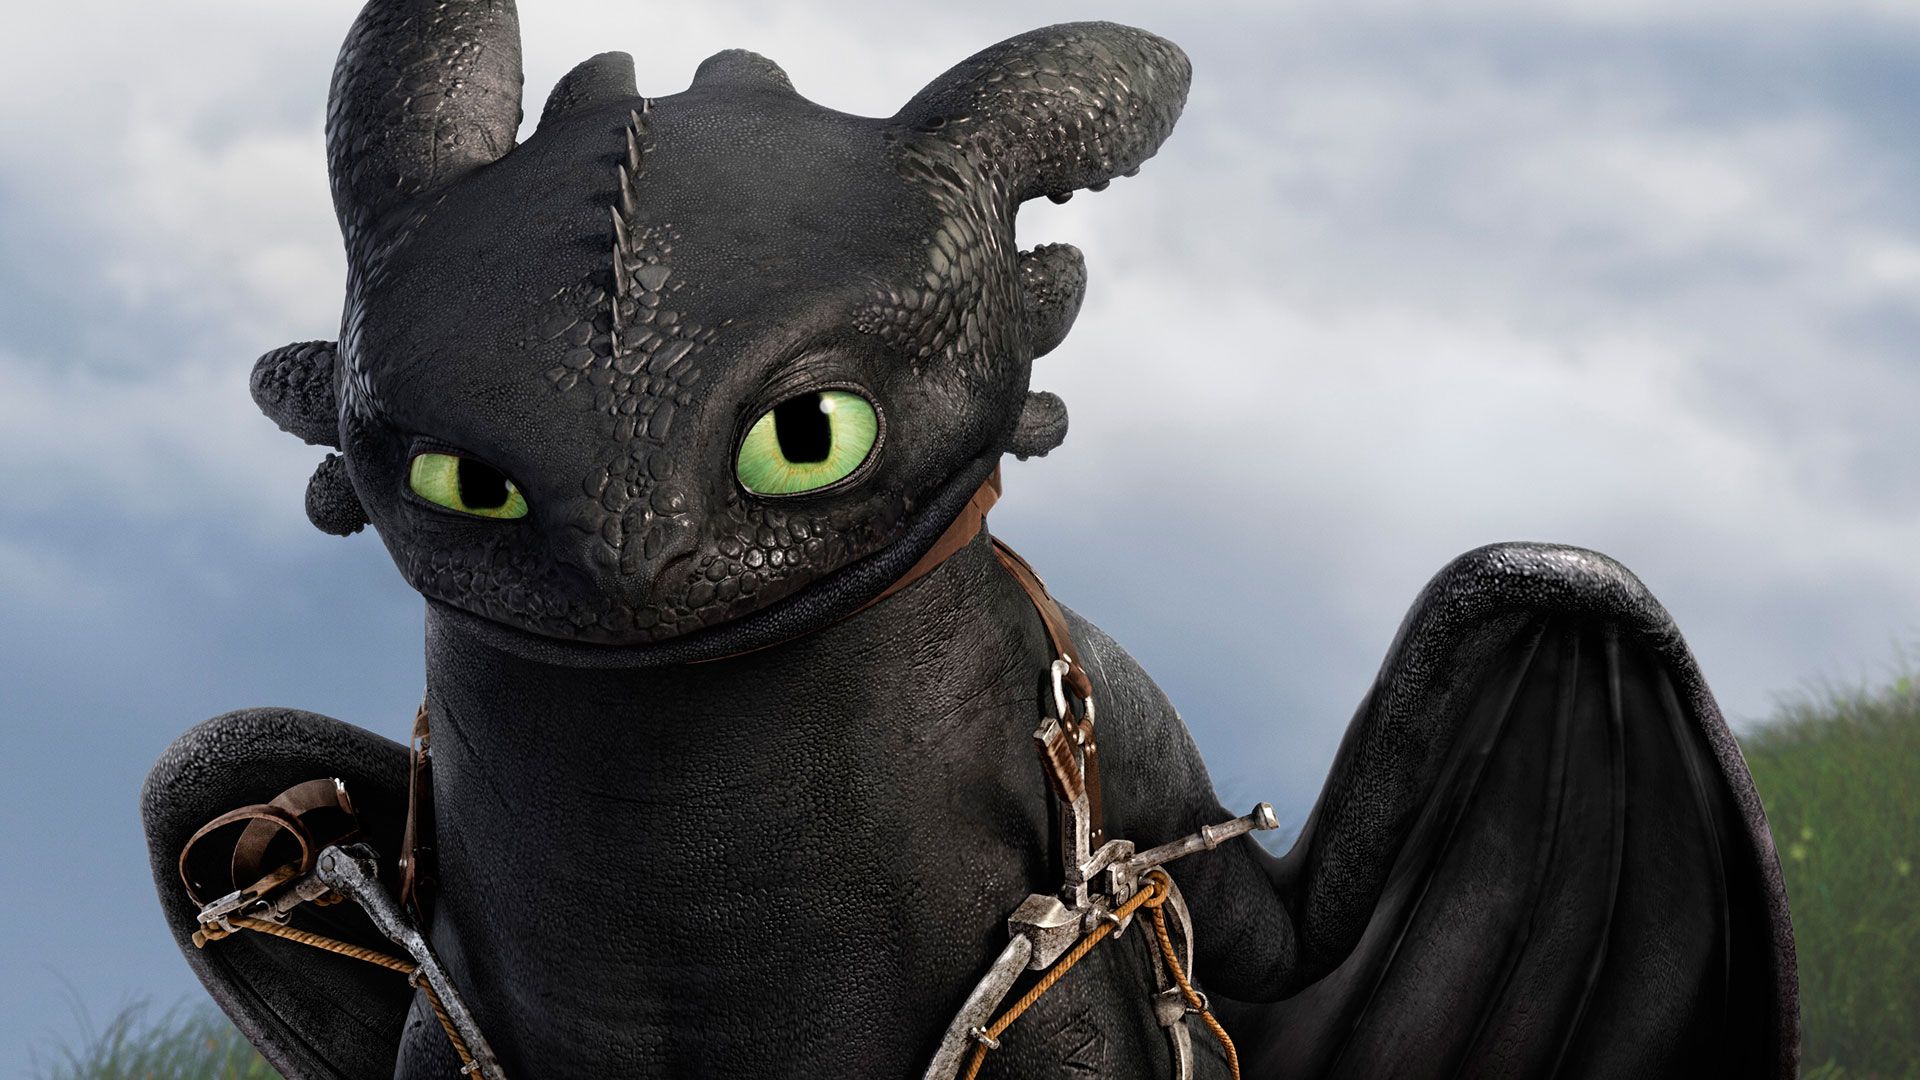 toothless-how-to-train-your-dragon-2-wallpaper-1920x10801.jpg